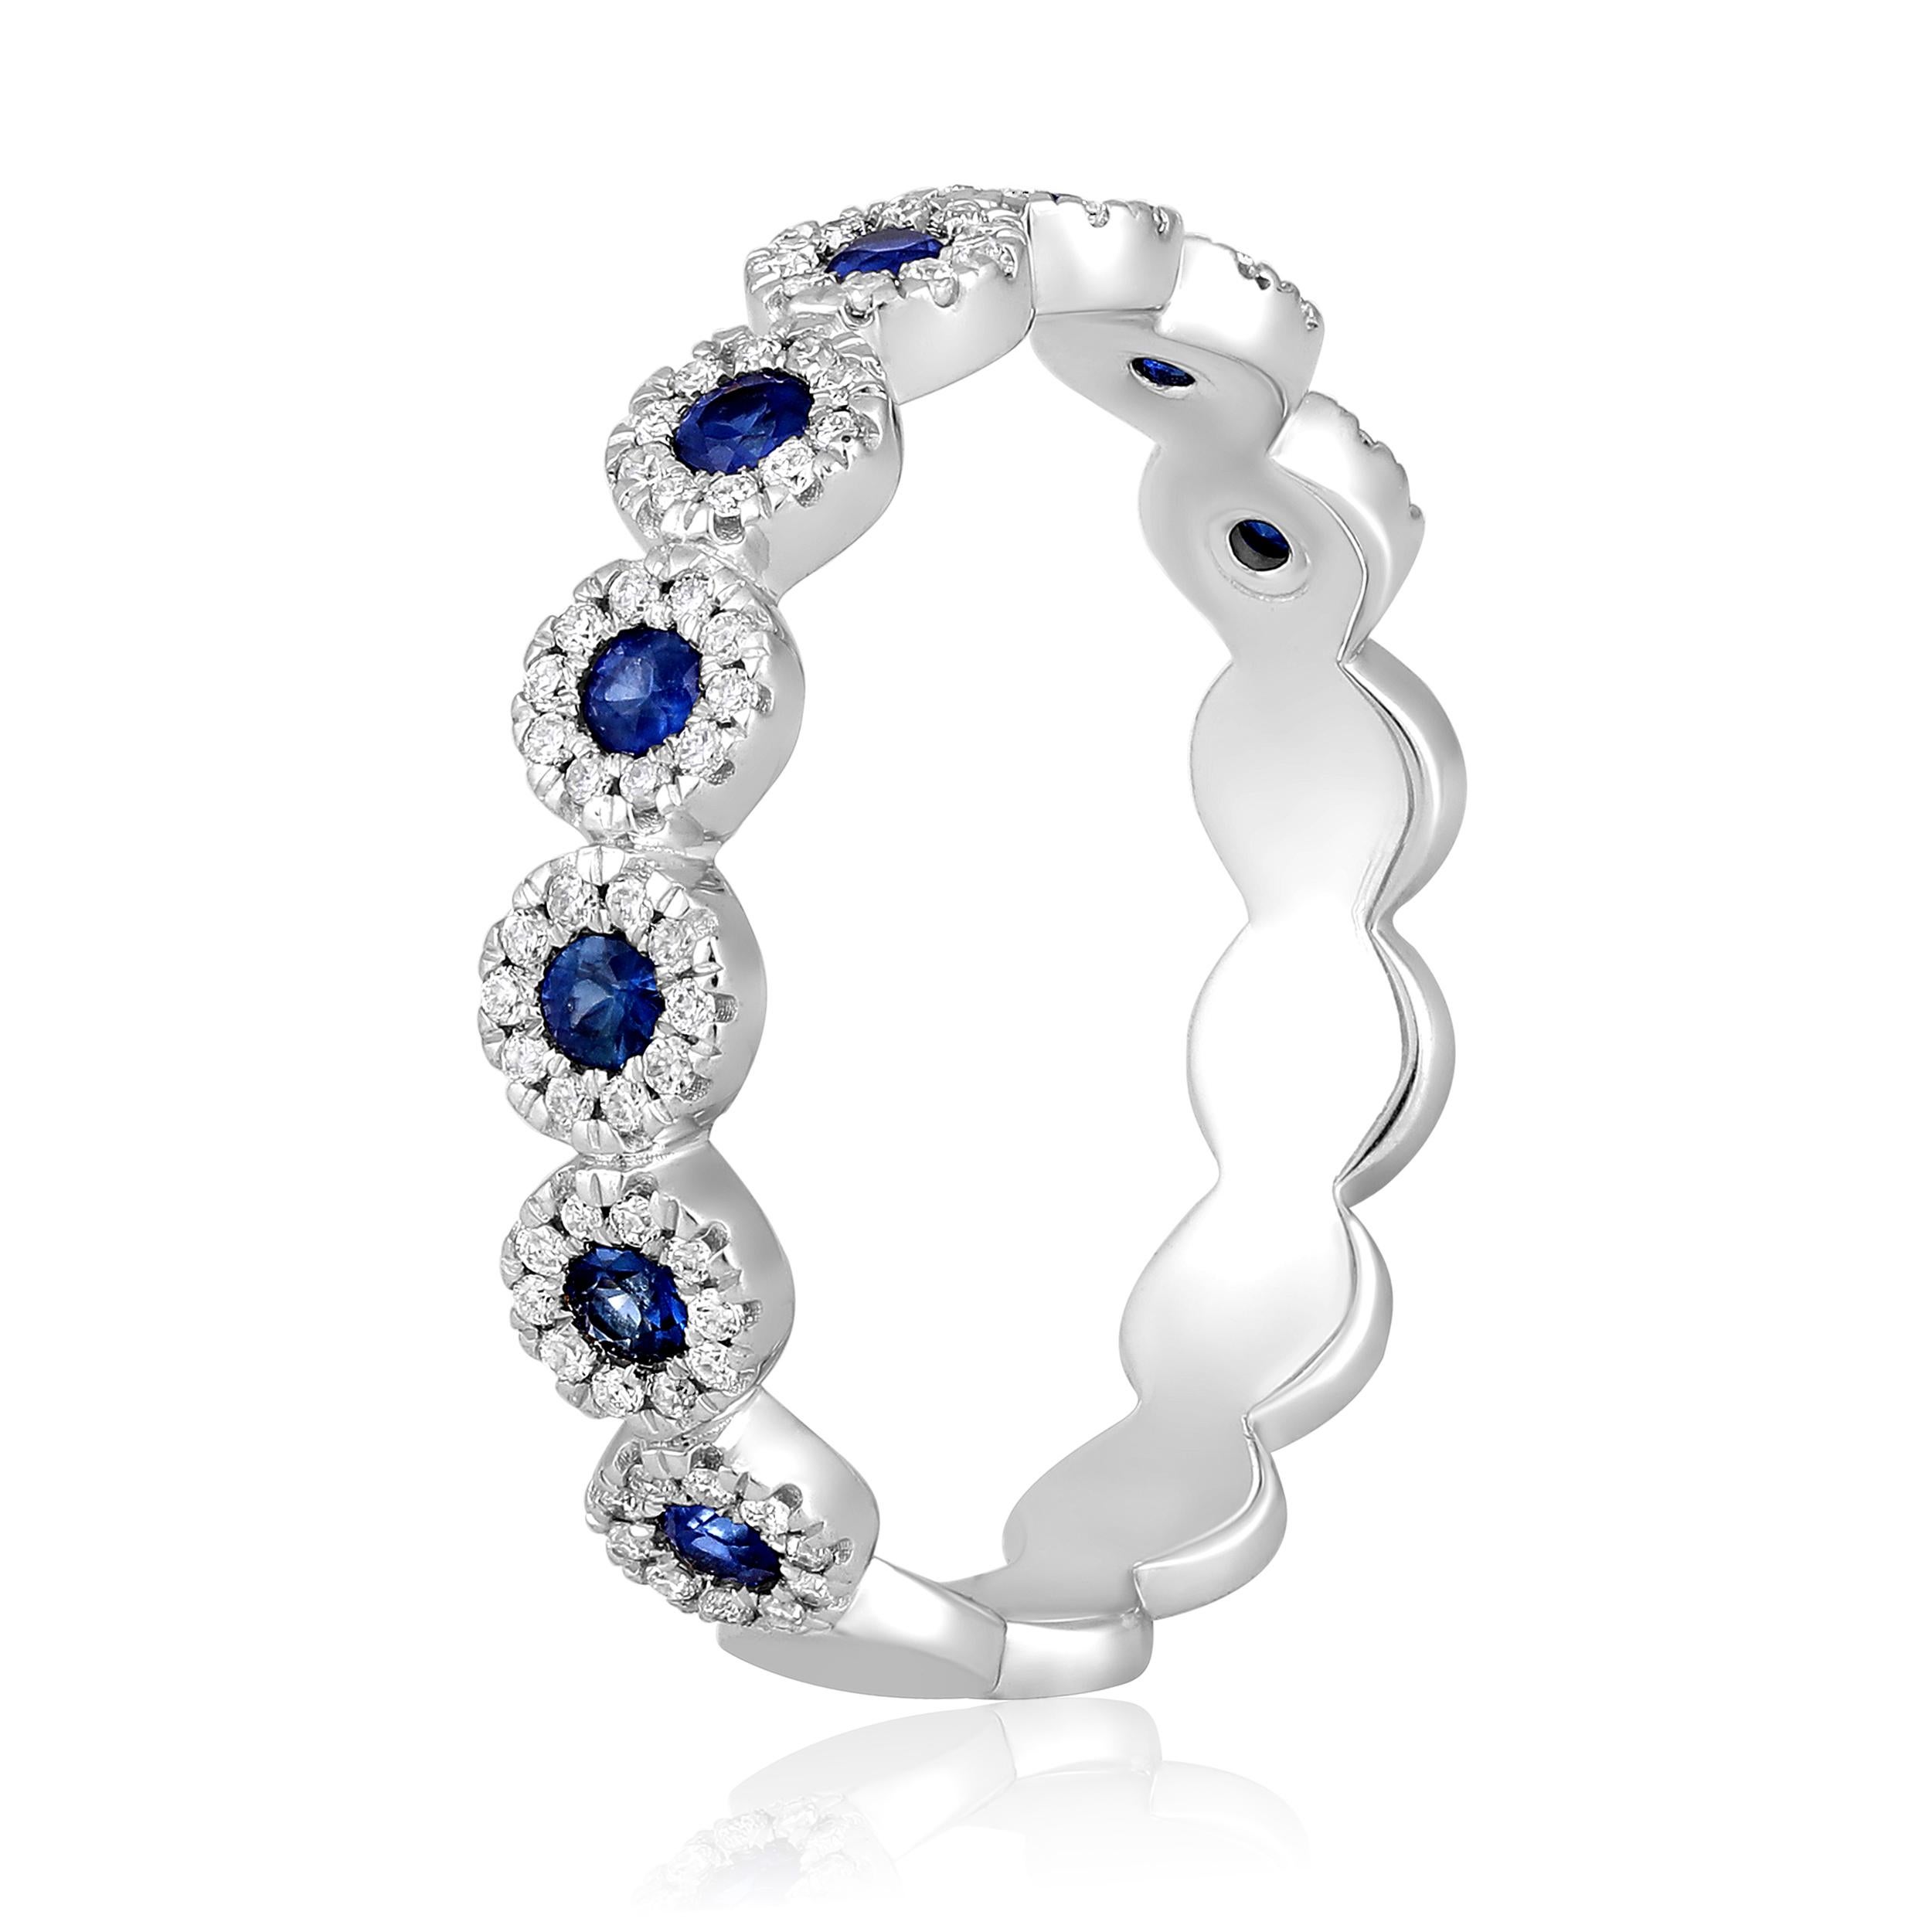 Ring Size: US 7

Crafted in 2.61 grams of 14K White Gold, the ring contains 90 stones of Round Natural Diamonds with a total of 0.17 carat in G-H color and I1-I2 clarity combined with 9 stones of Round Shaped Natural Sapphire Gemstones with a total